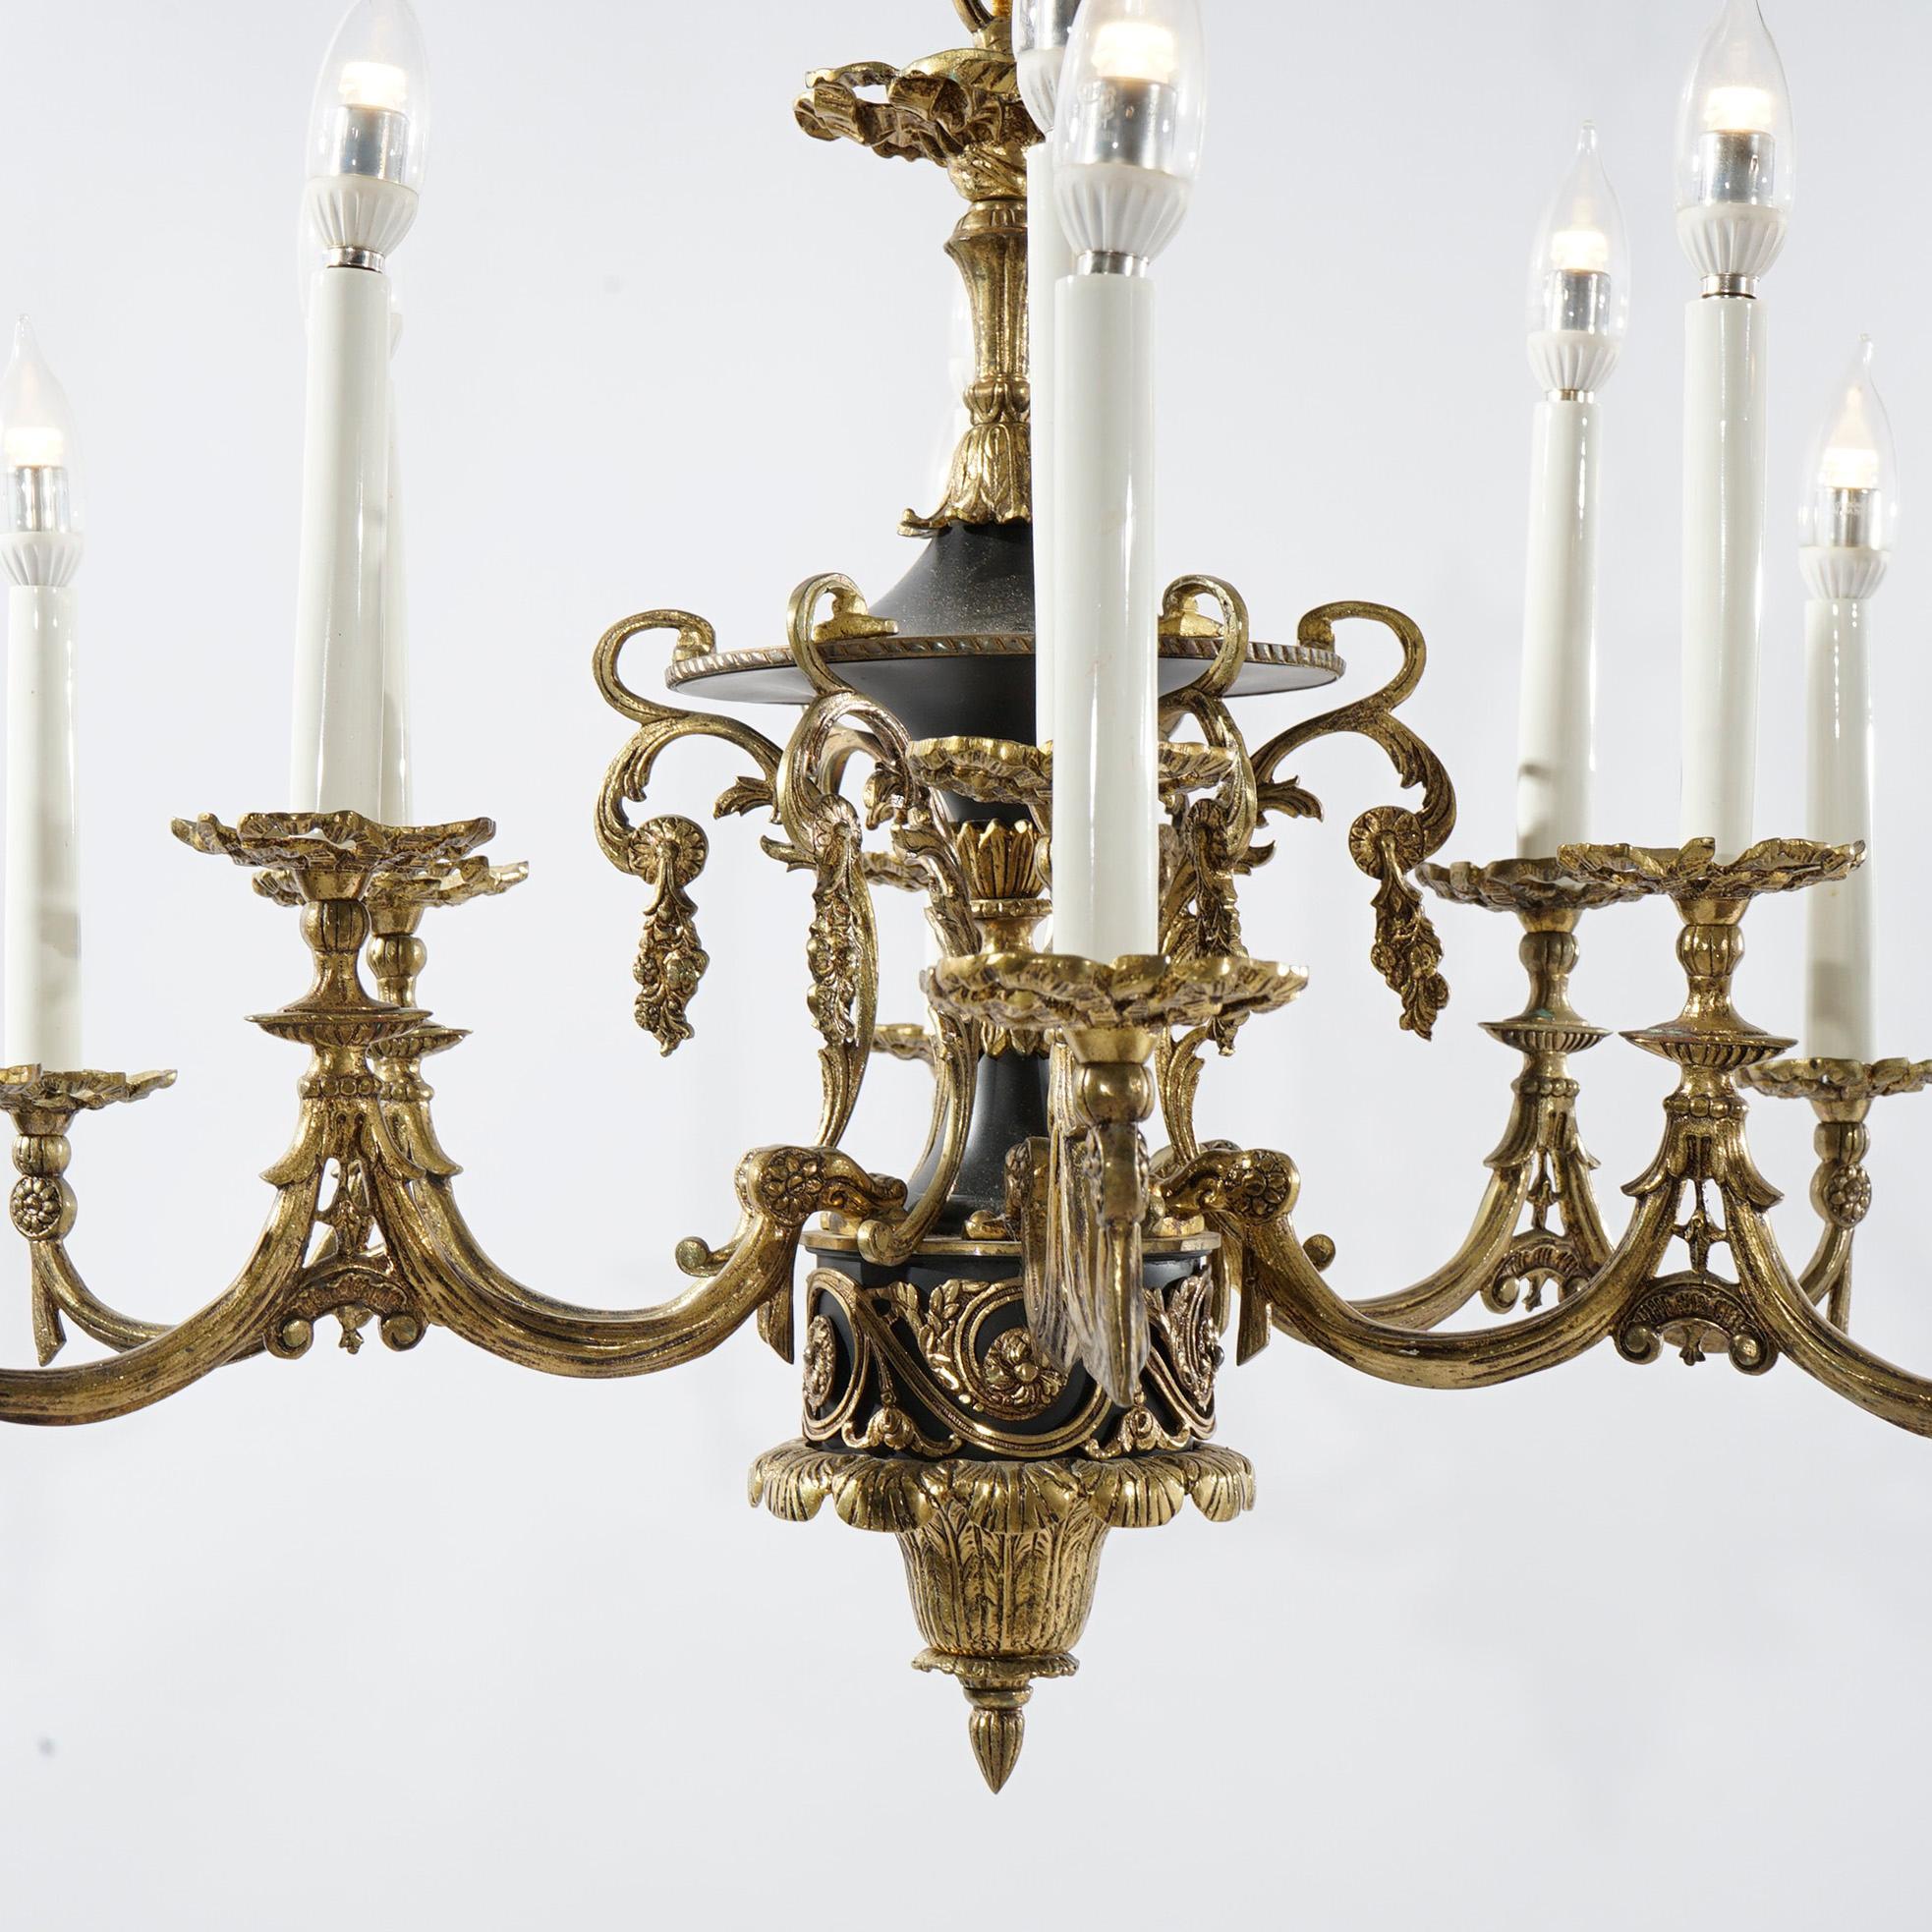 Antique French Empire Style Ebonized Bronze Twelve-Light Chandelier, Early 20thC For Sale 2